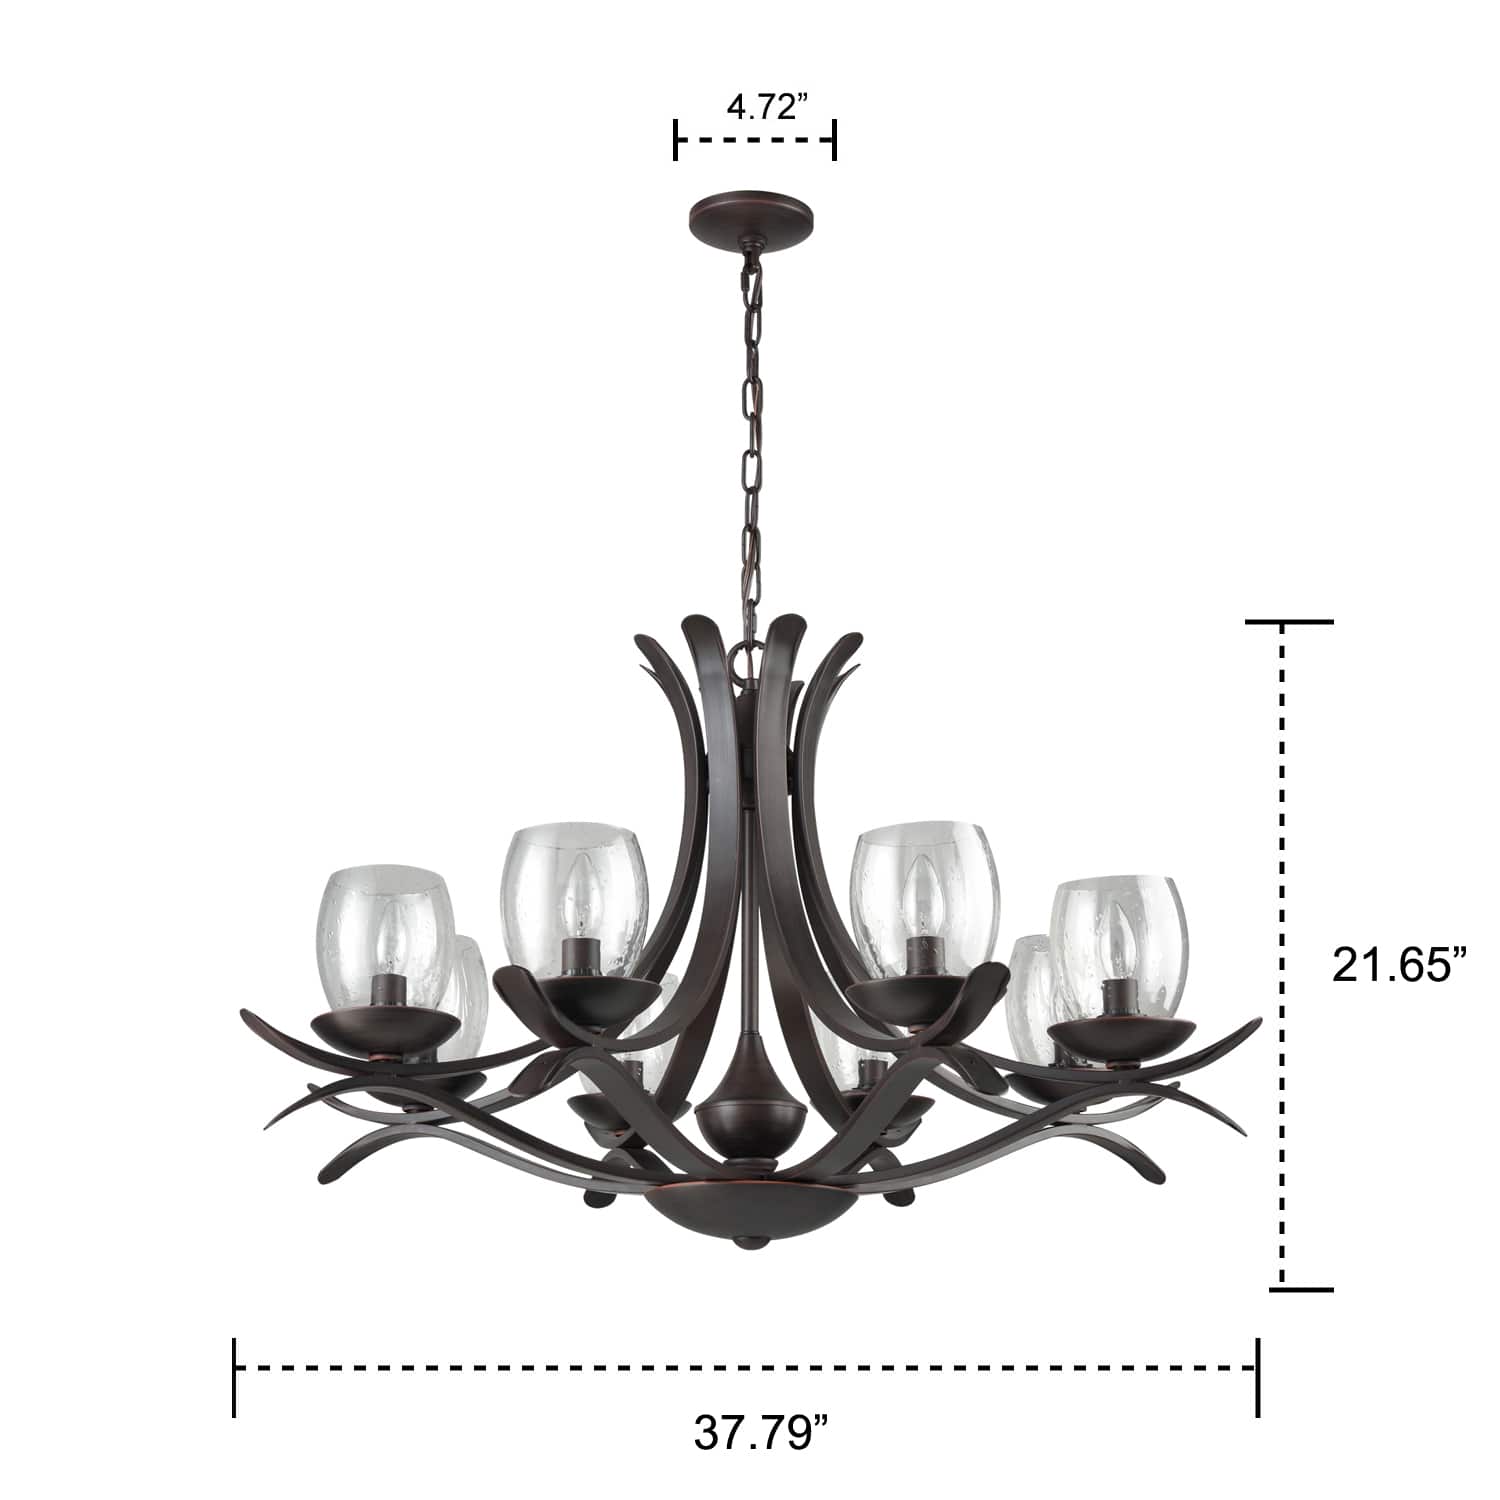 Rustic Bronze Dining Room Chandelier with Seeded Glass - 8 Light